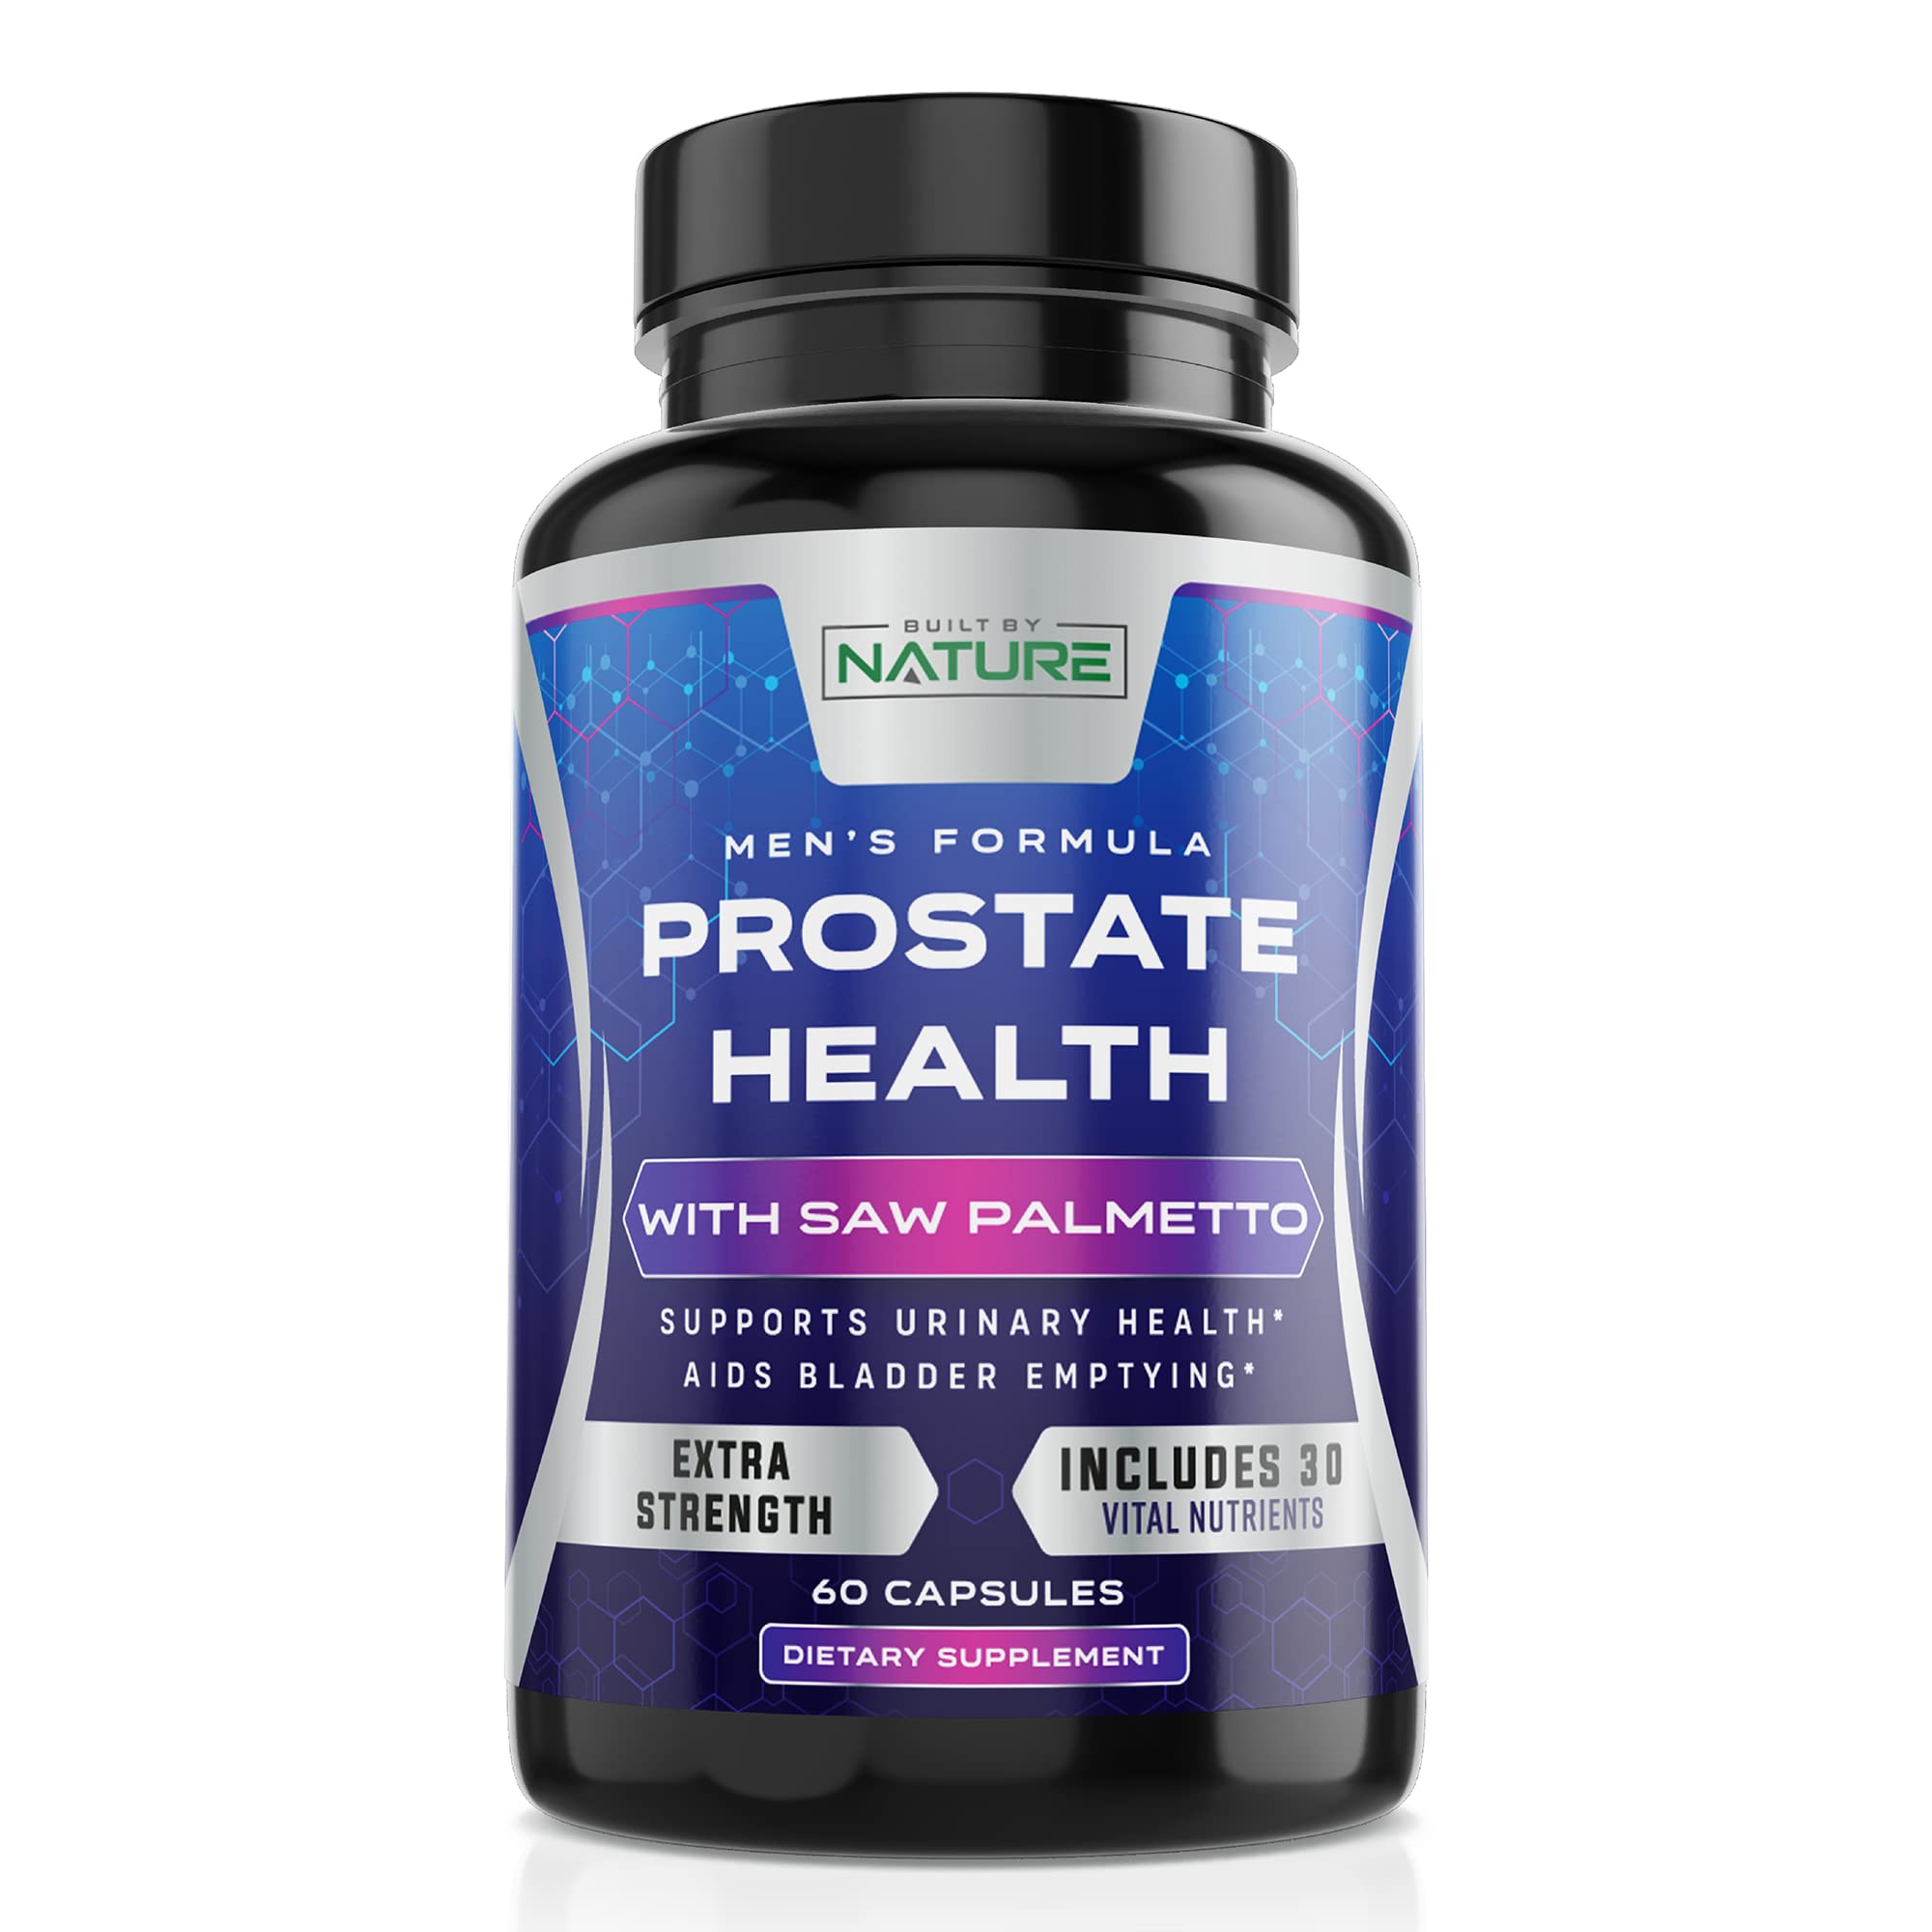 Saw Palmetto for Men - Prostate Health Supplement Extract, Non-GMO, Gluten-Free, Supports Prostate & Urinary Health, Aids Bladder Emptying, Helps Reduce Inflammation & Balding, 60 Capsules